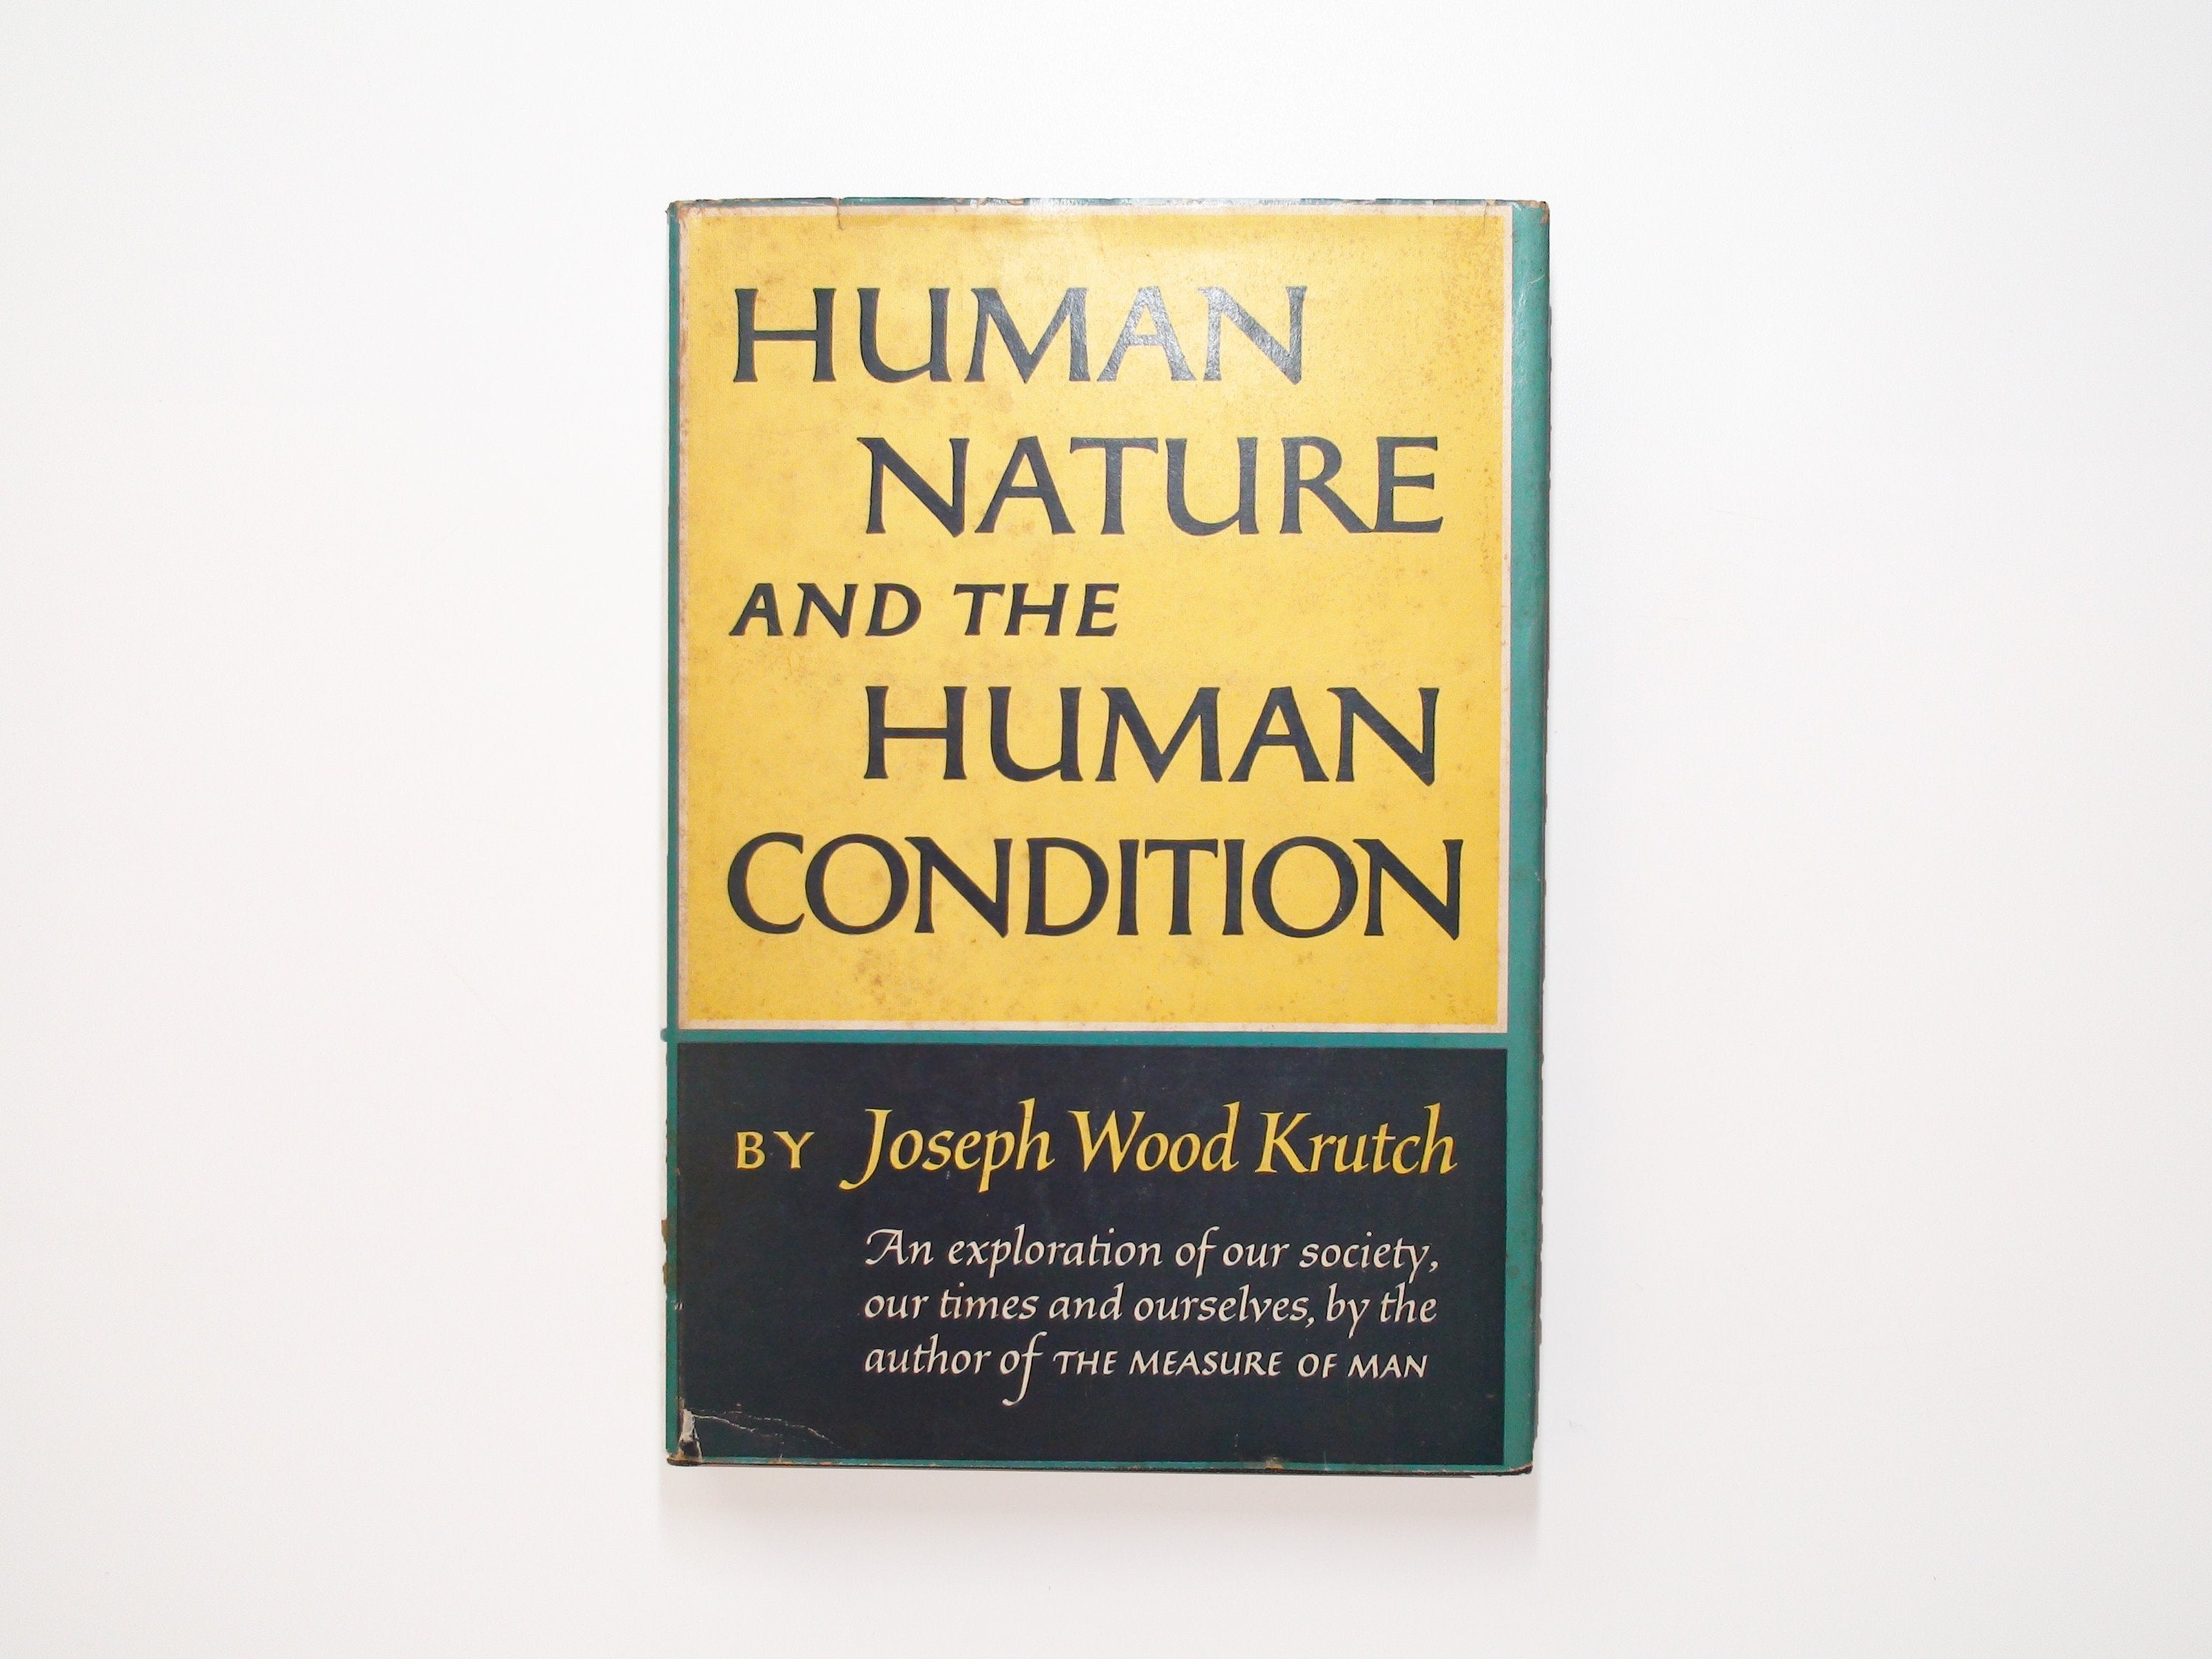 Human Nature and the Human Condition, by Joseph Wood Krutch, 1st Printing, 1959